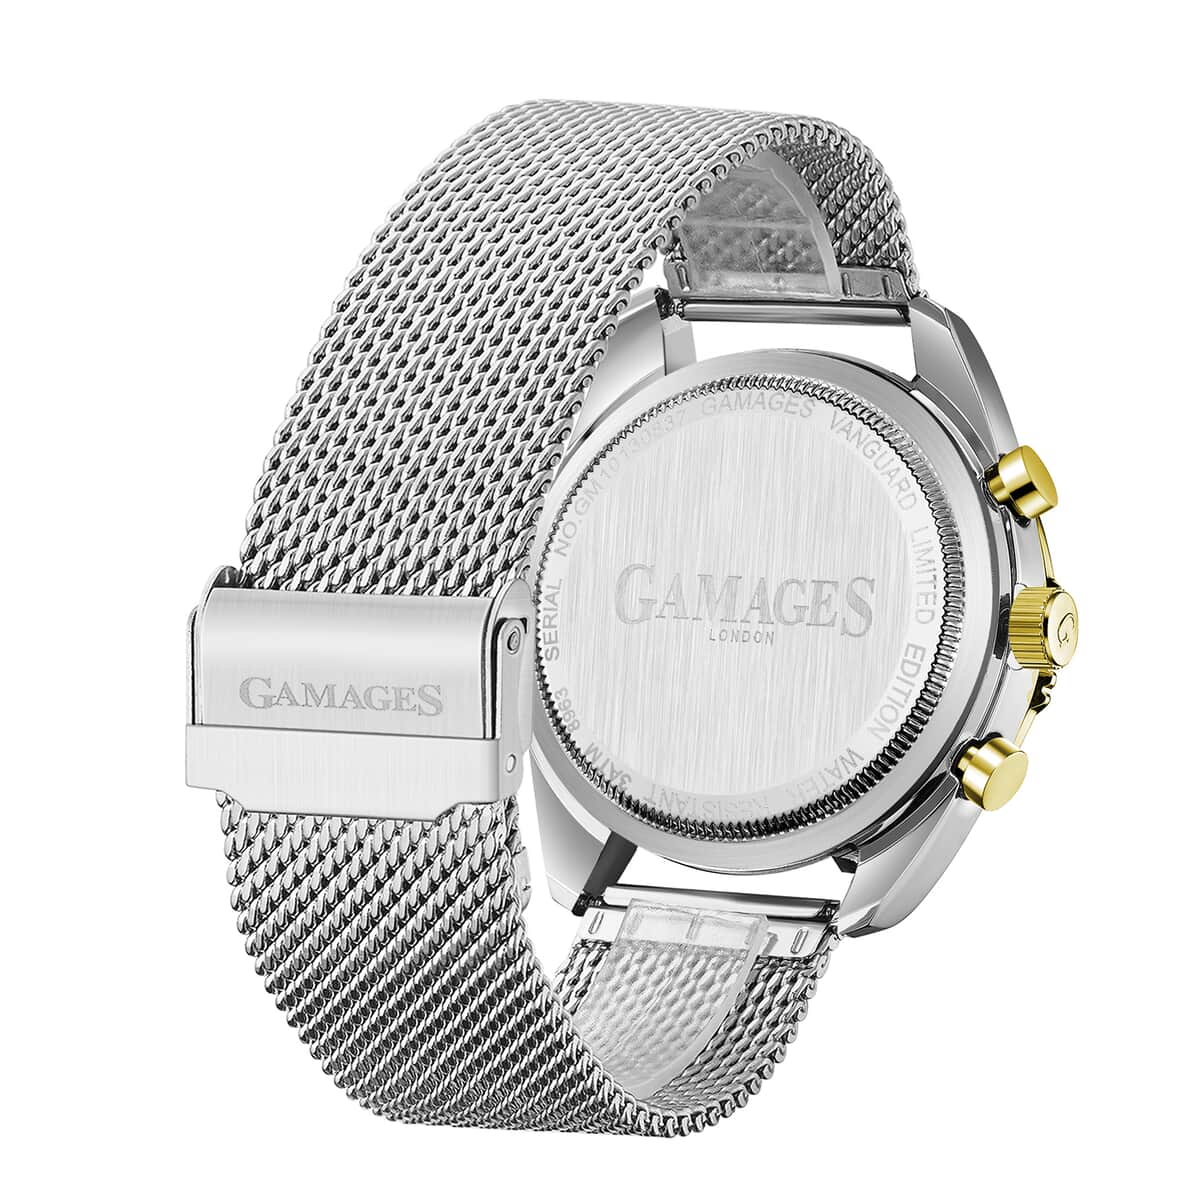 GAMAGES OF LONDON Limited Edition Hand Assembled Vanguard Automatic Movement Mesh Strap Watch in ION Plated Gold and Stainless Steel (45mm) with FREE GIFT PEN image number 3